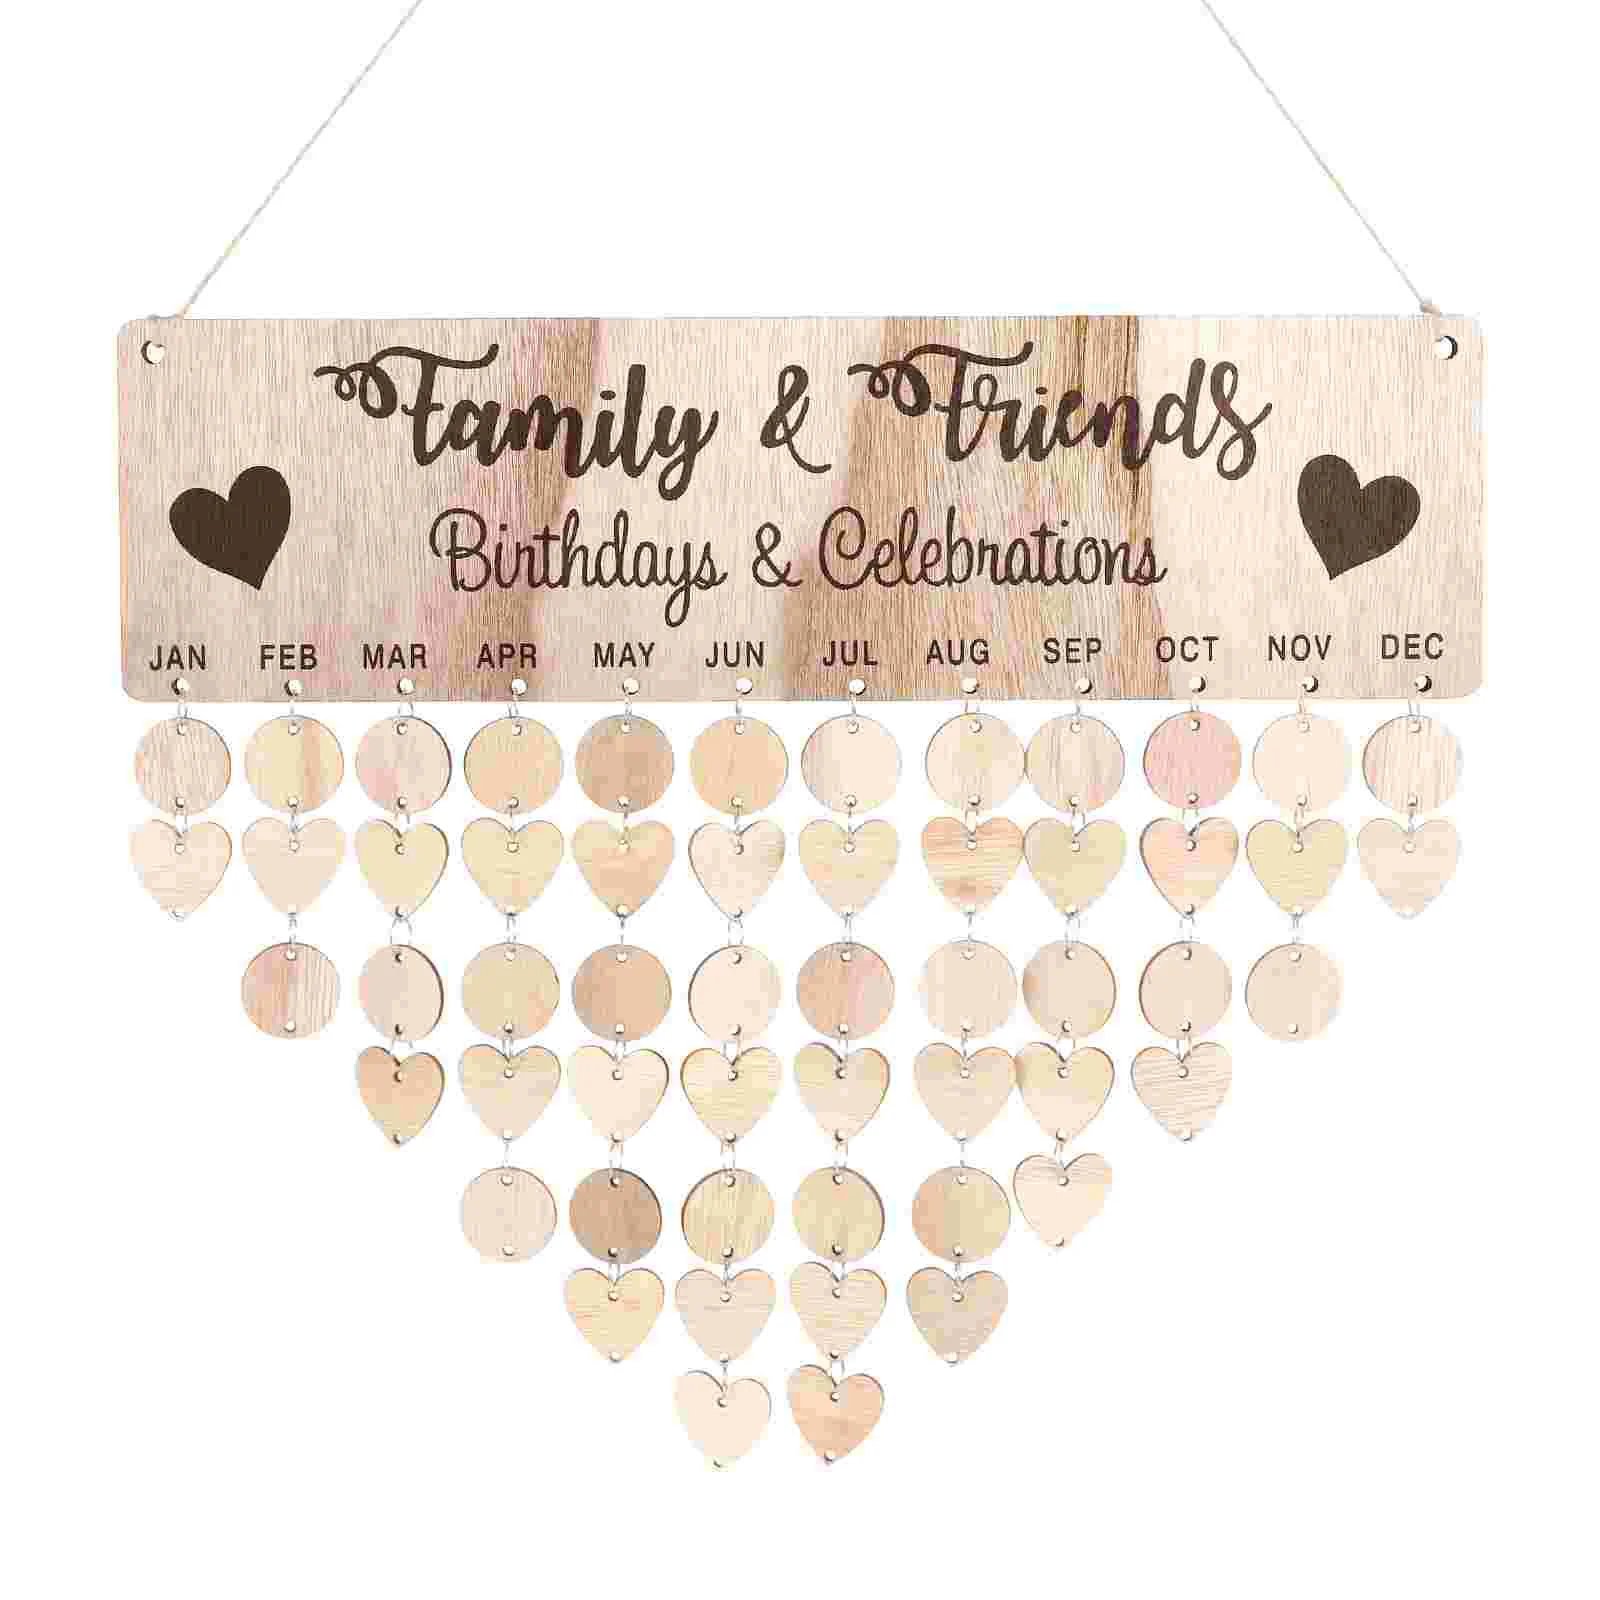 family and friends special days ramadan reminder board calendar birthday tracker wall hanging plaque board home hanging decor Calendar Birthday Family Board Hanging Wooden Wall Reminder Plaque Diy Personalized Wood Gifts Date Reminding Home Decor Tags